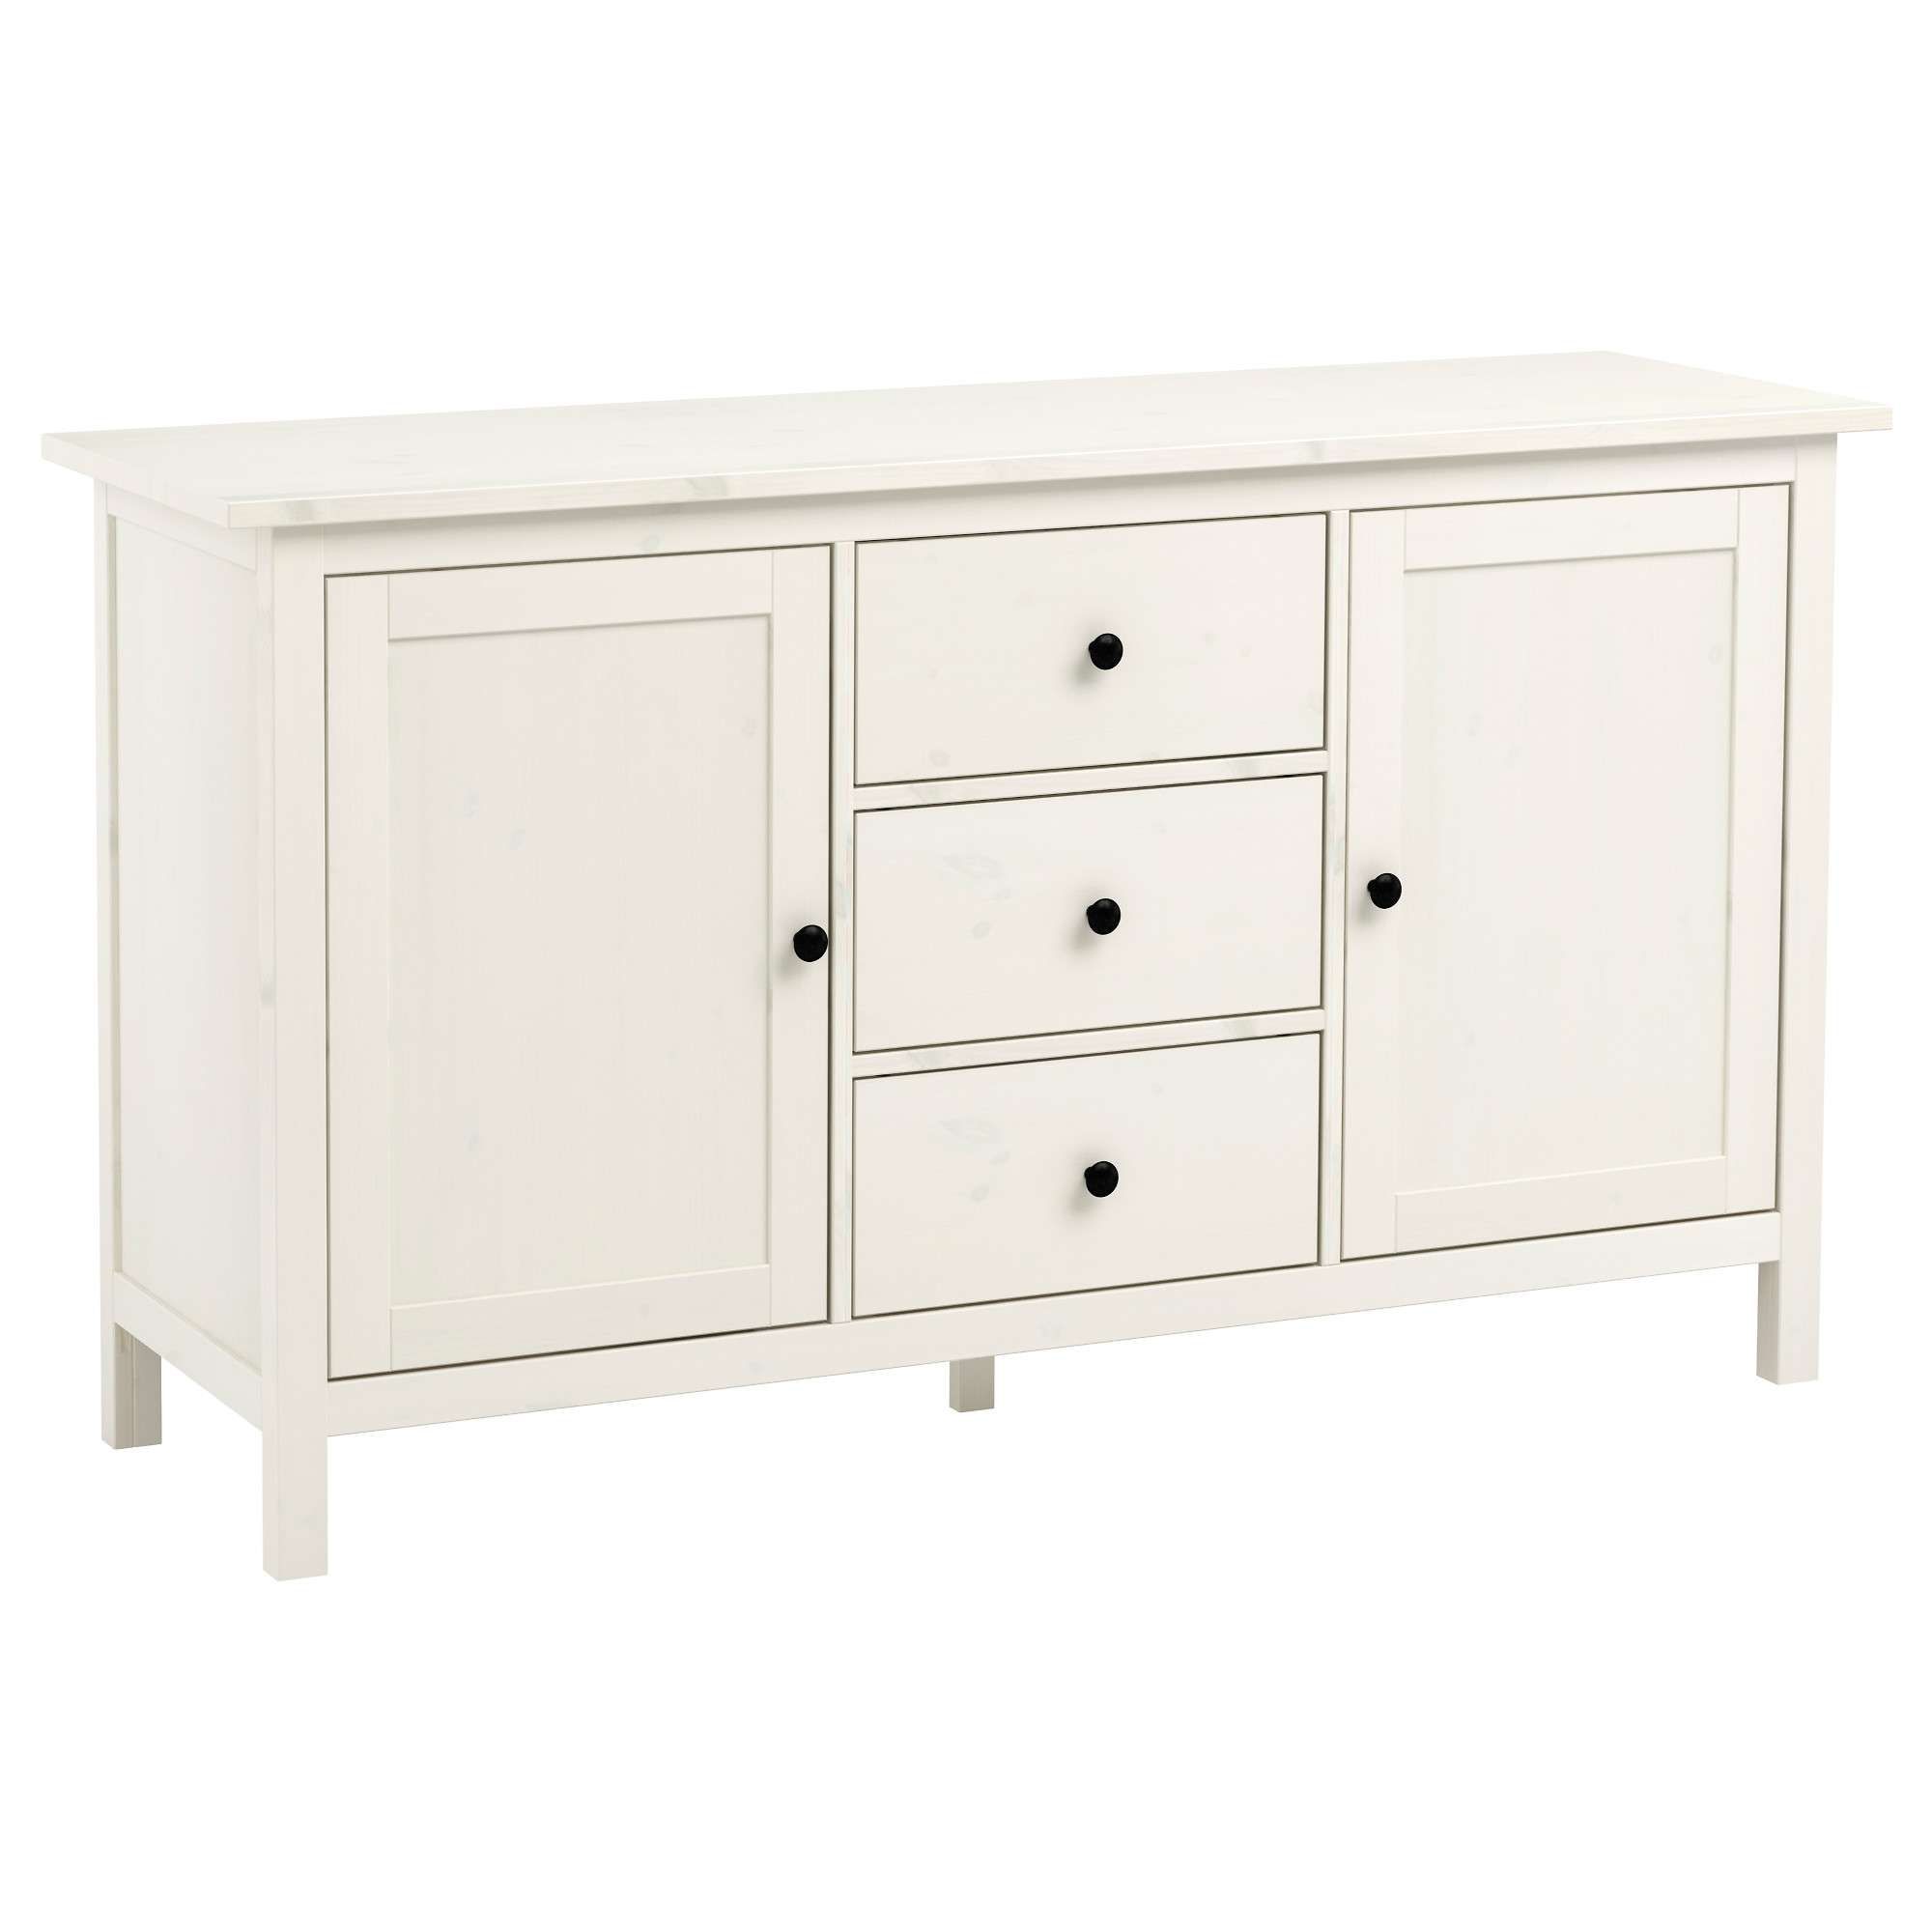 Hemnes Sideboard – White Stain – Ikea With Credenza Buffet Sideboards (View 15 of 20)